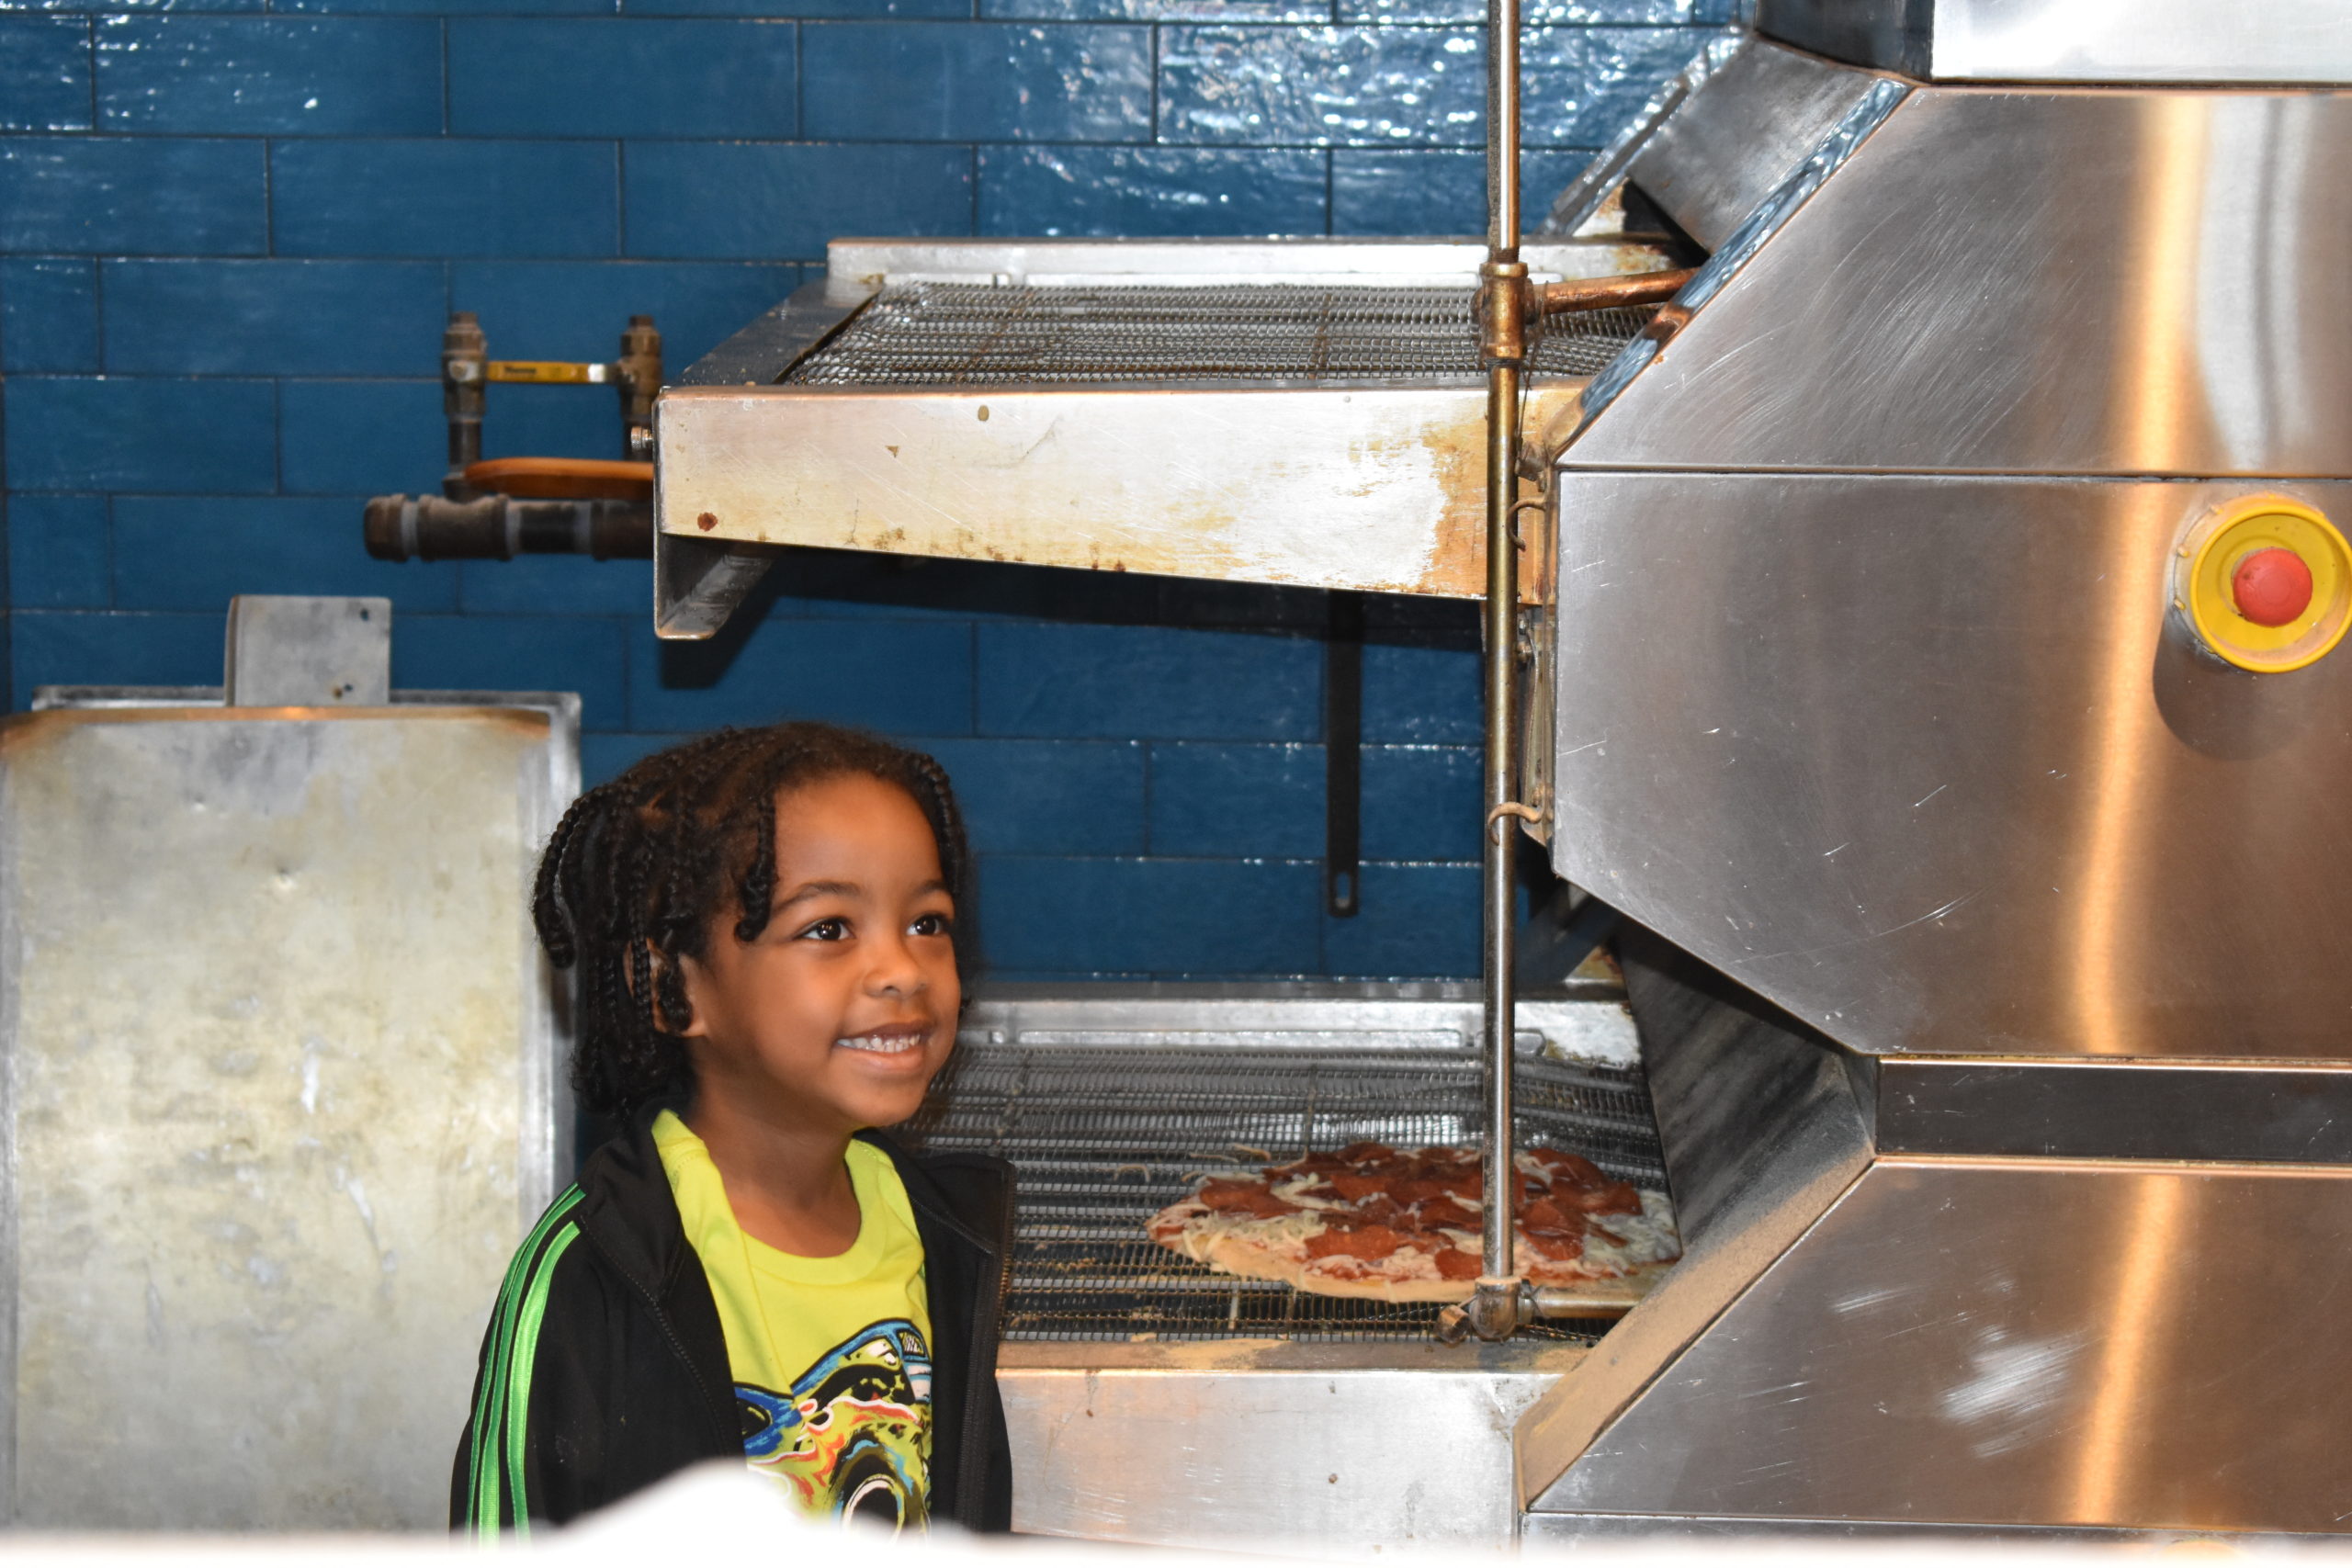 Image boy standing in a restaurant kitchen watching his pizza bake in an over